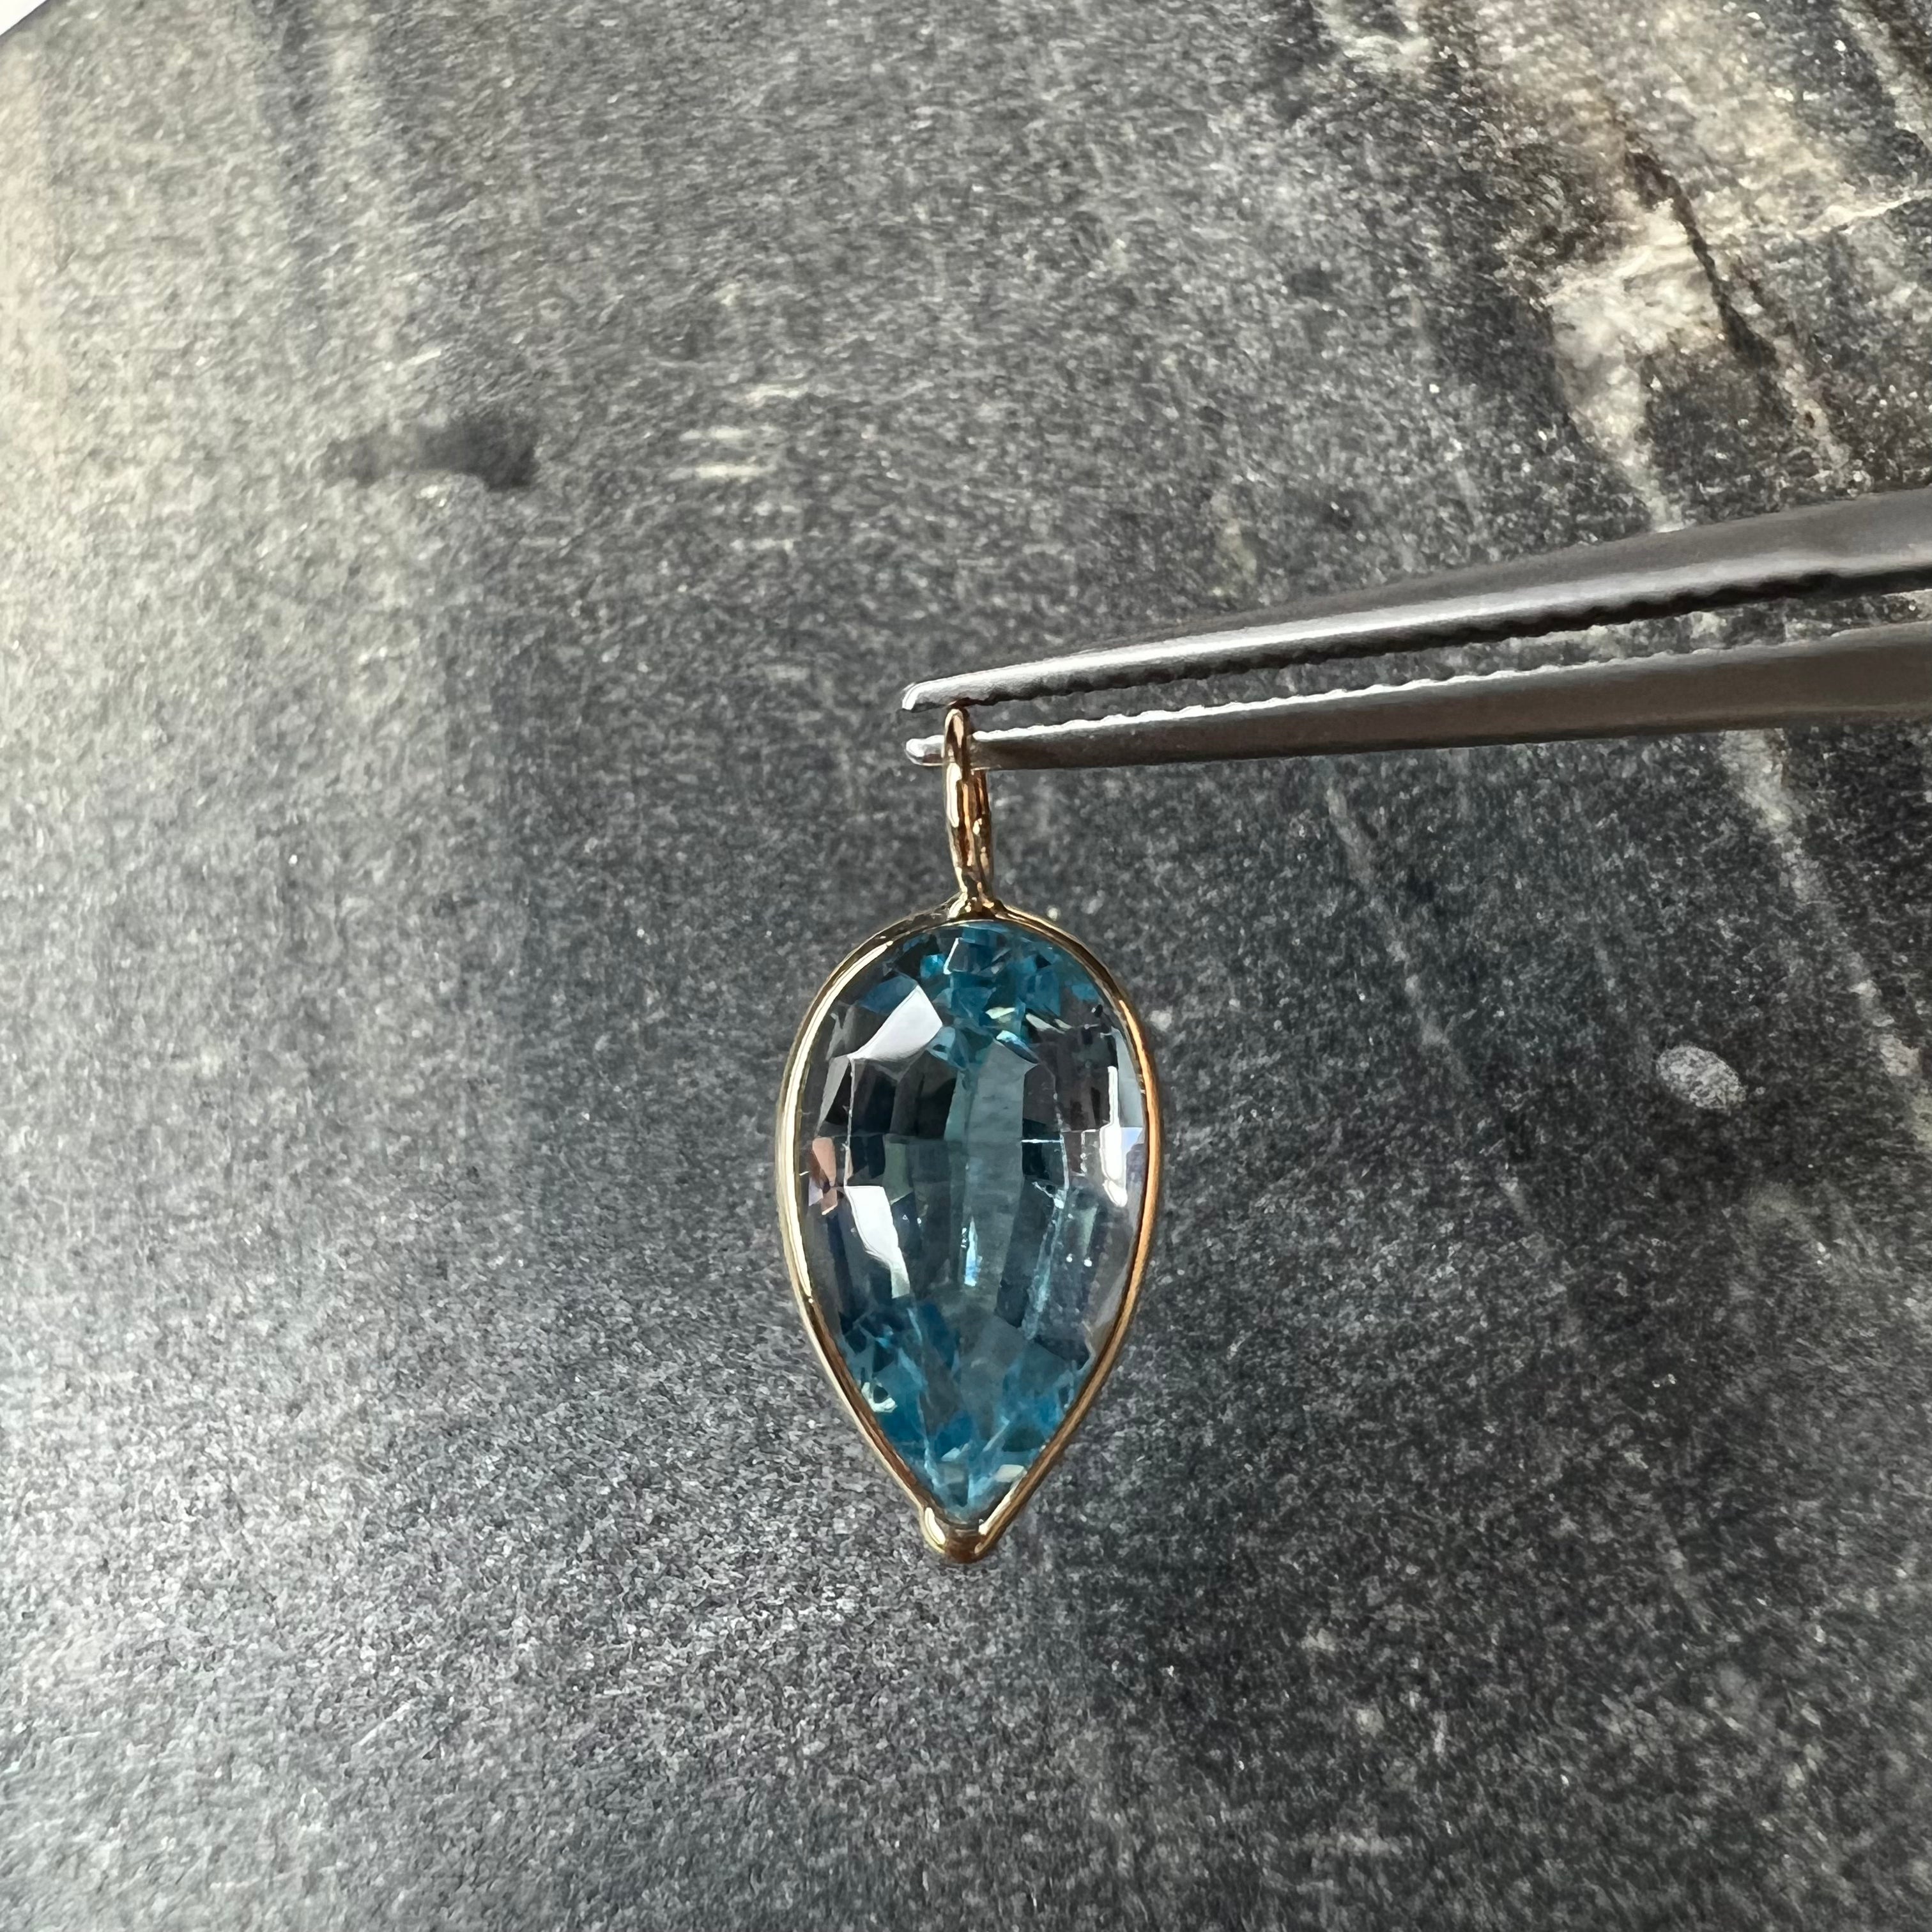 5CT Natural Blue Pear Topaz 14K Yellow Gold Pendant Charm 19x8.5mm